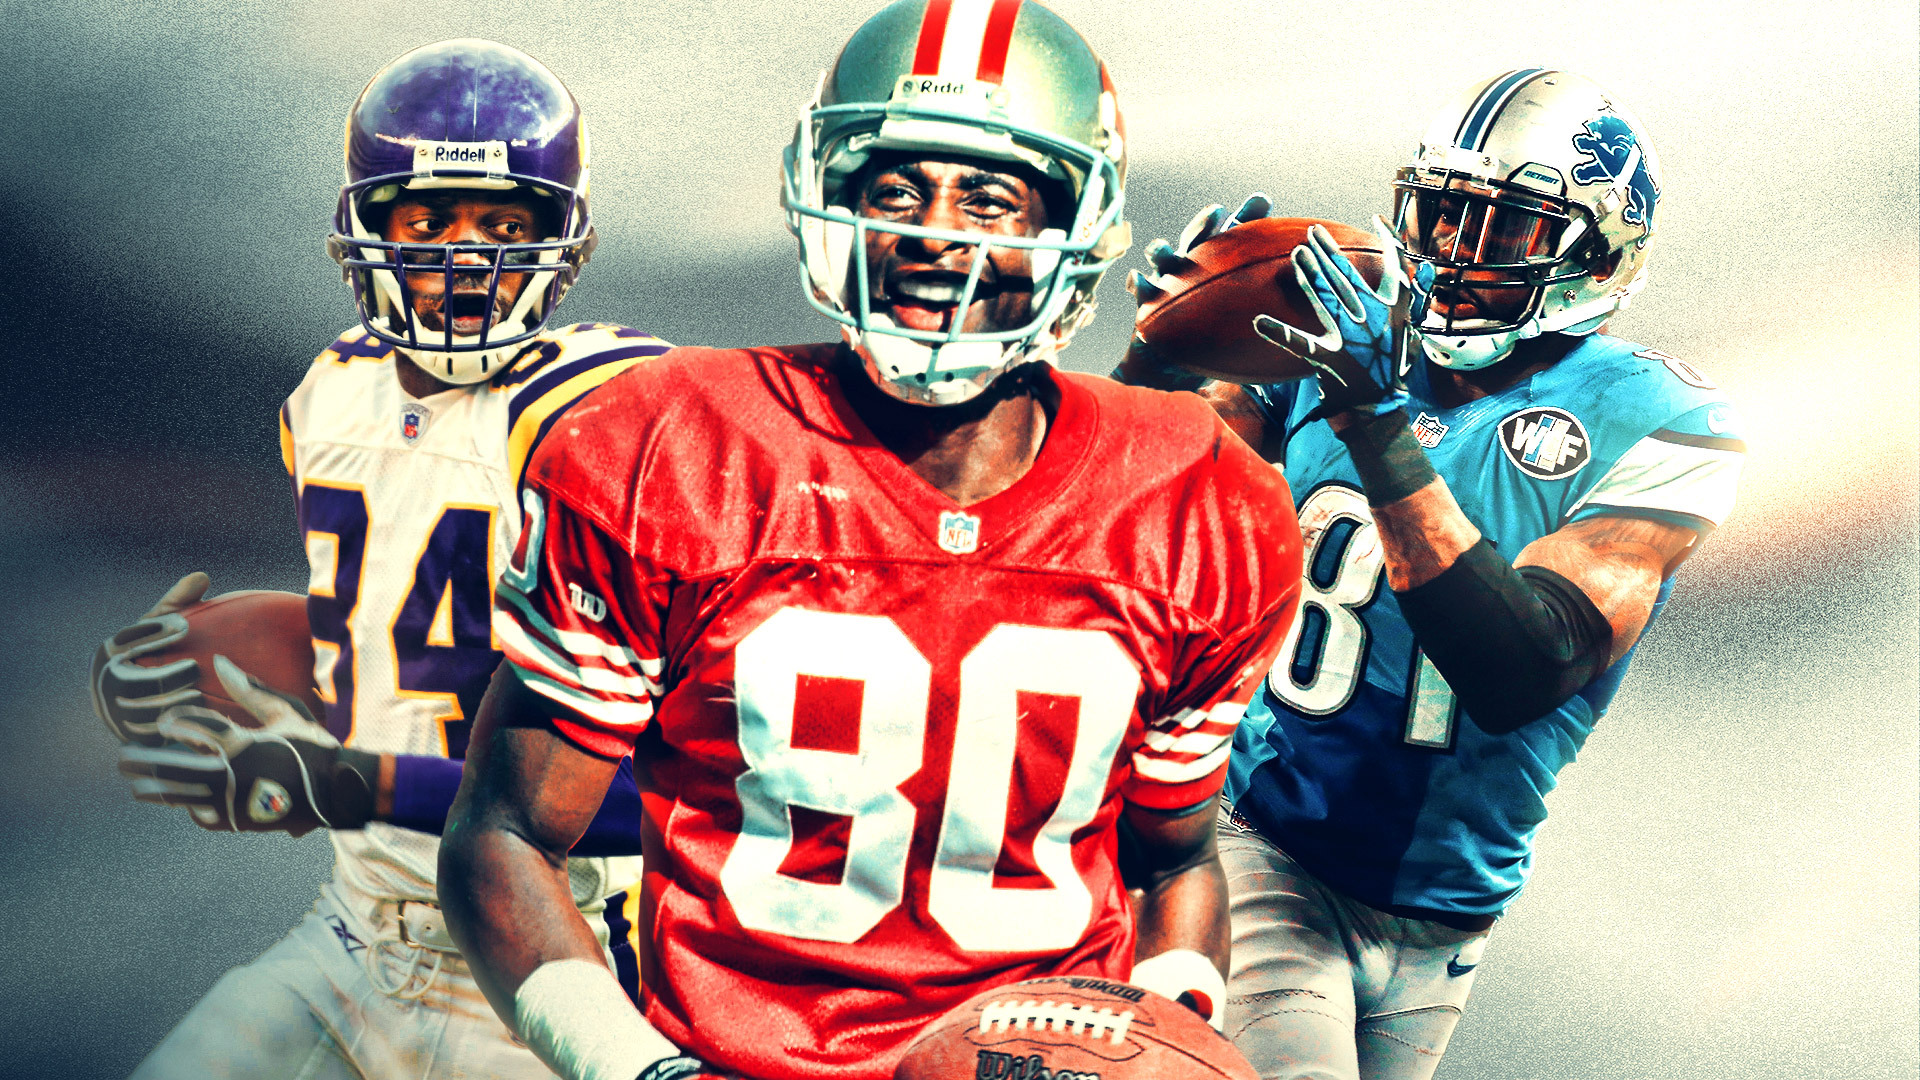 Photo: nfl best wide receivers ever